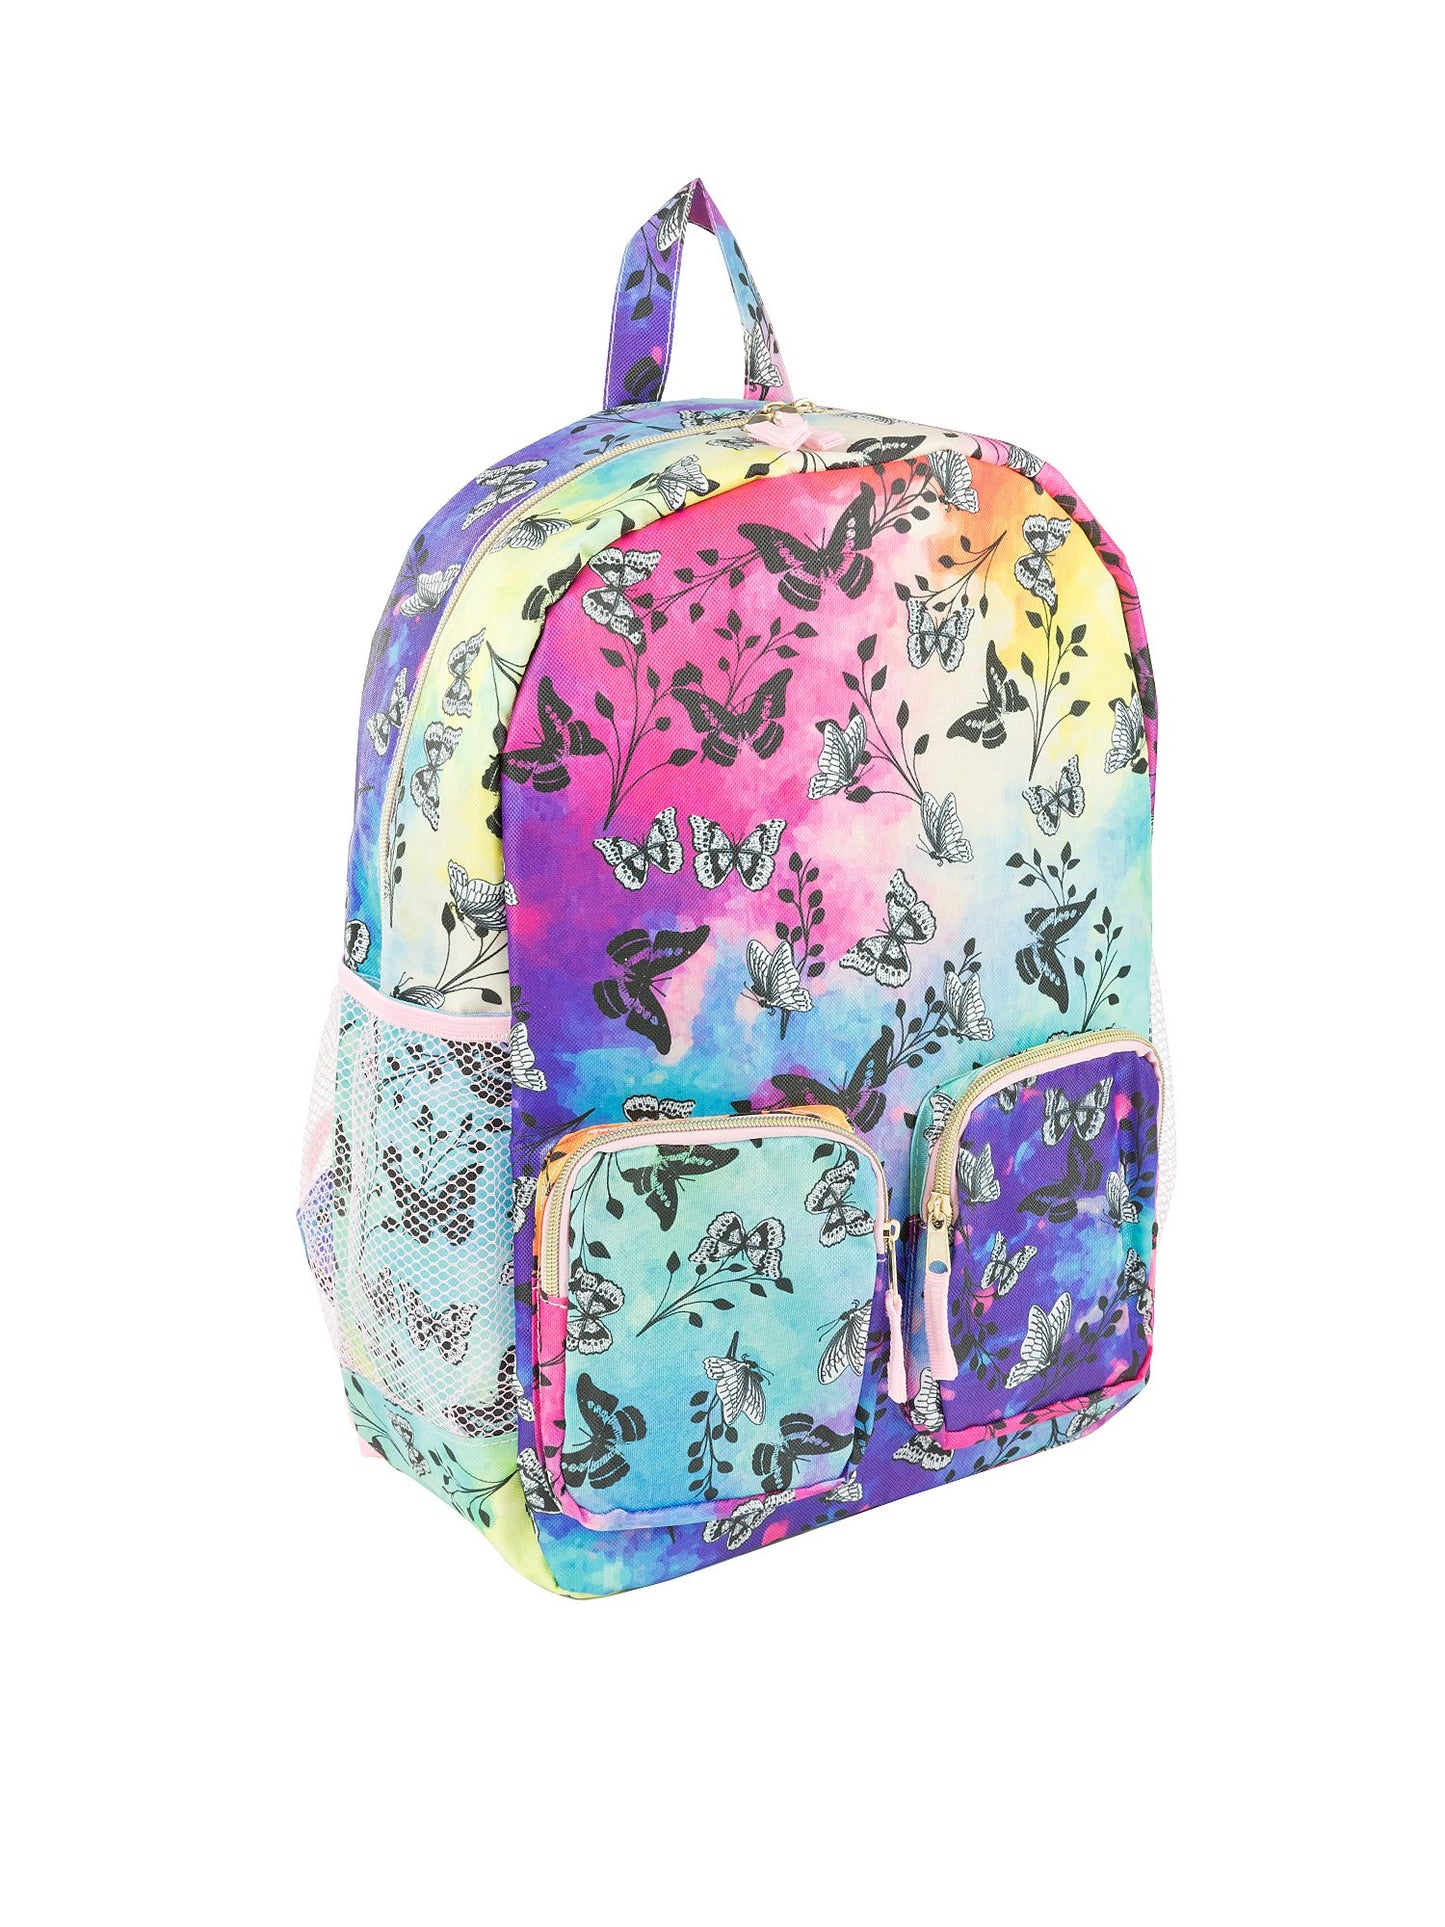 Backpack - Double Pouch w/ Side Pockets - Under1Sky